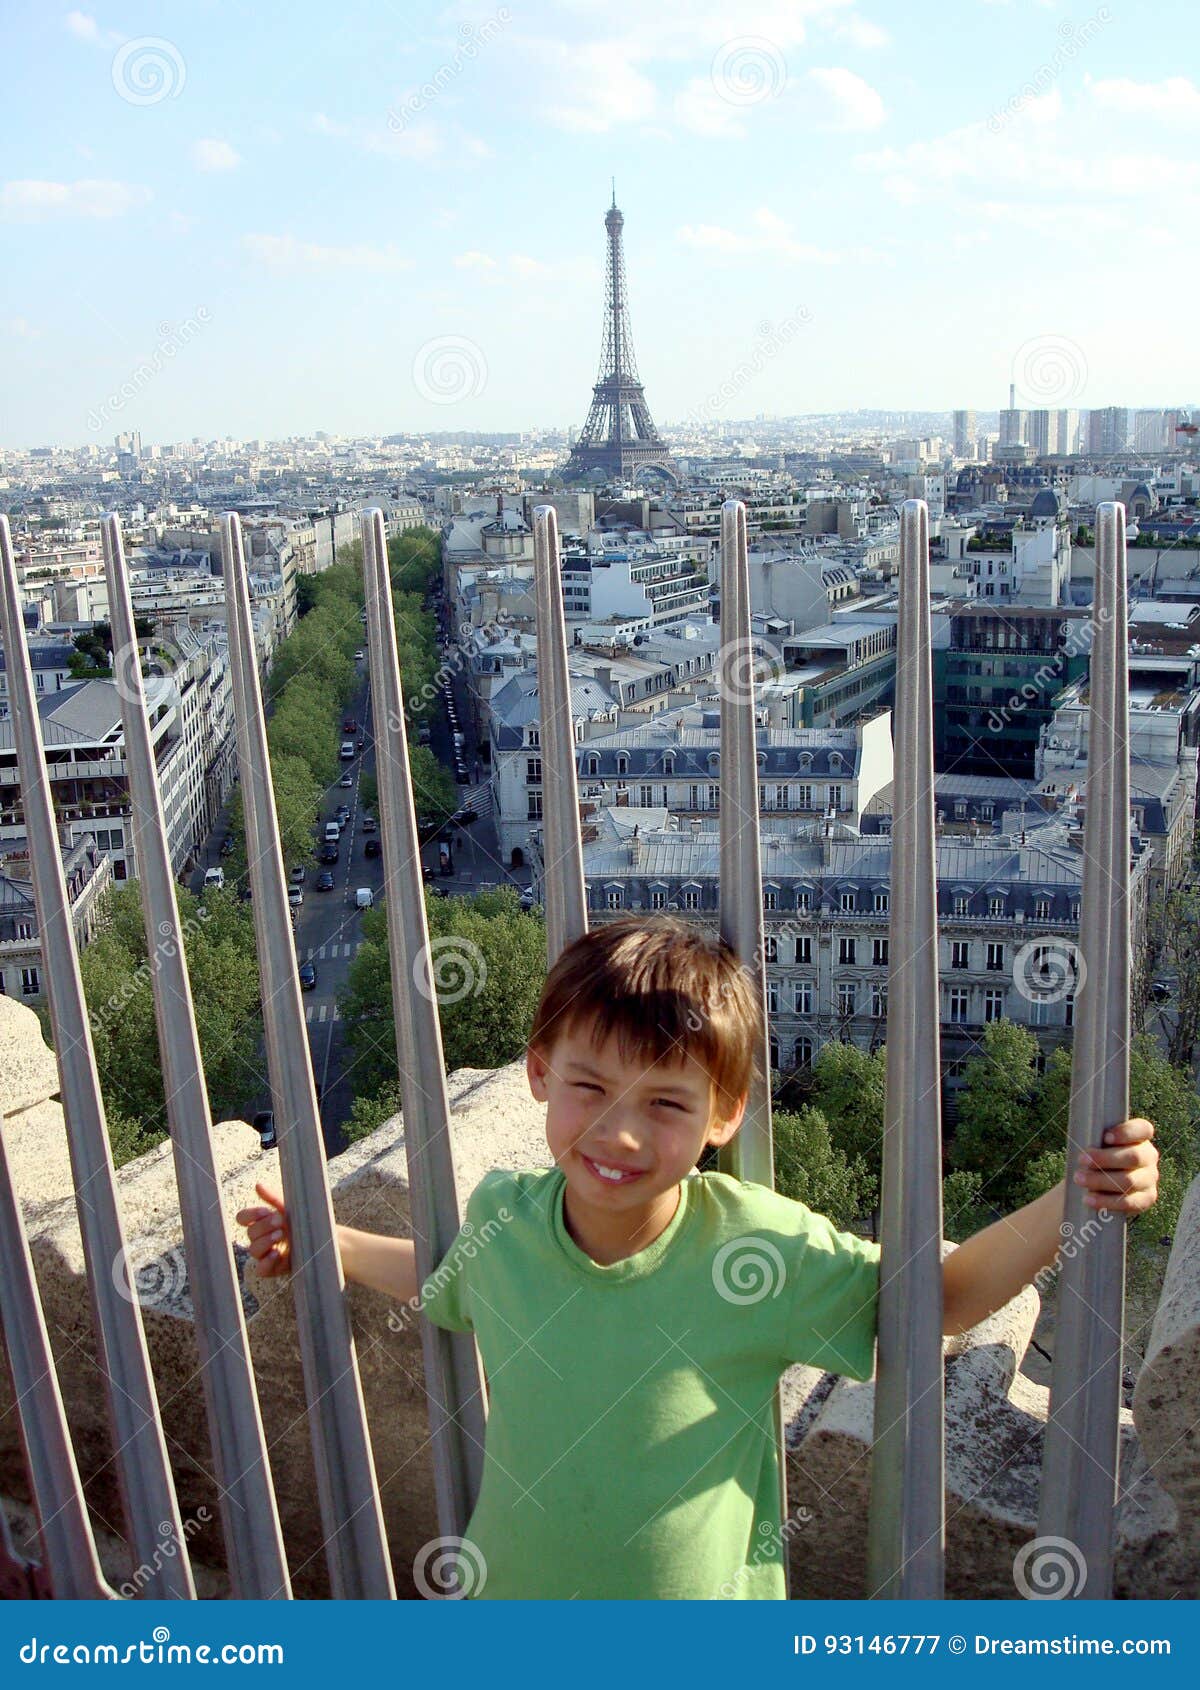 standing on top of the eiffel tower